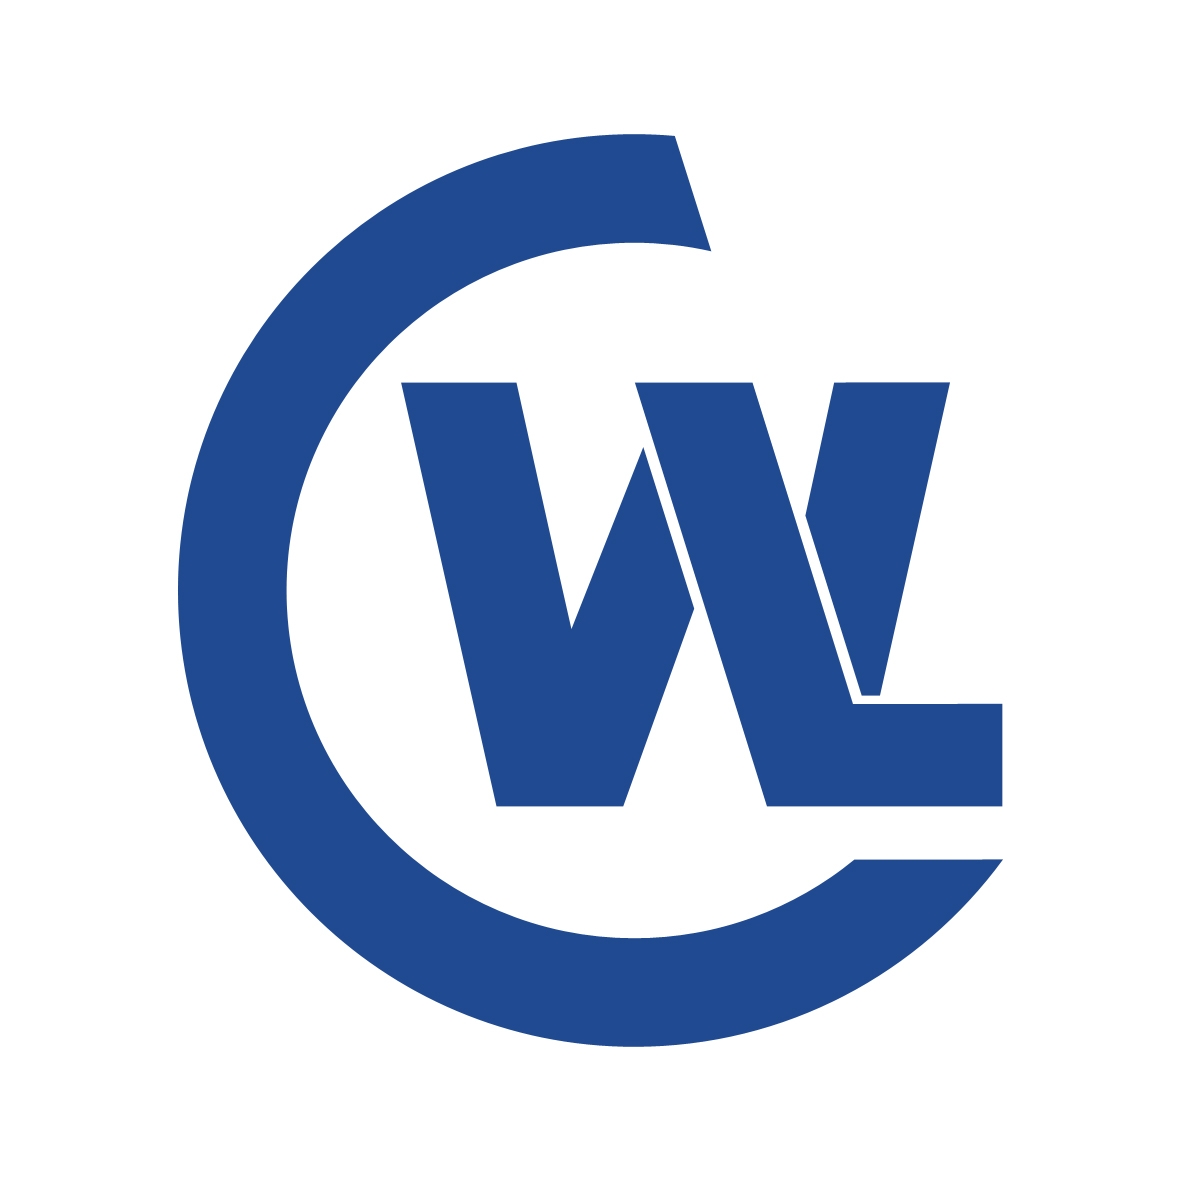 logo for Compagnie des wagons-lits